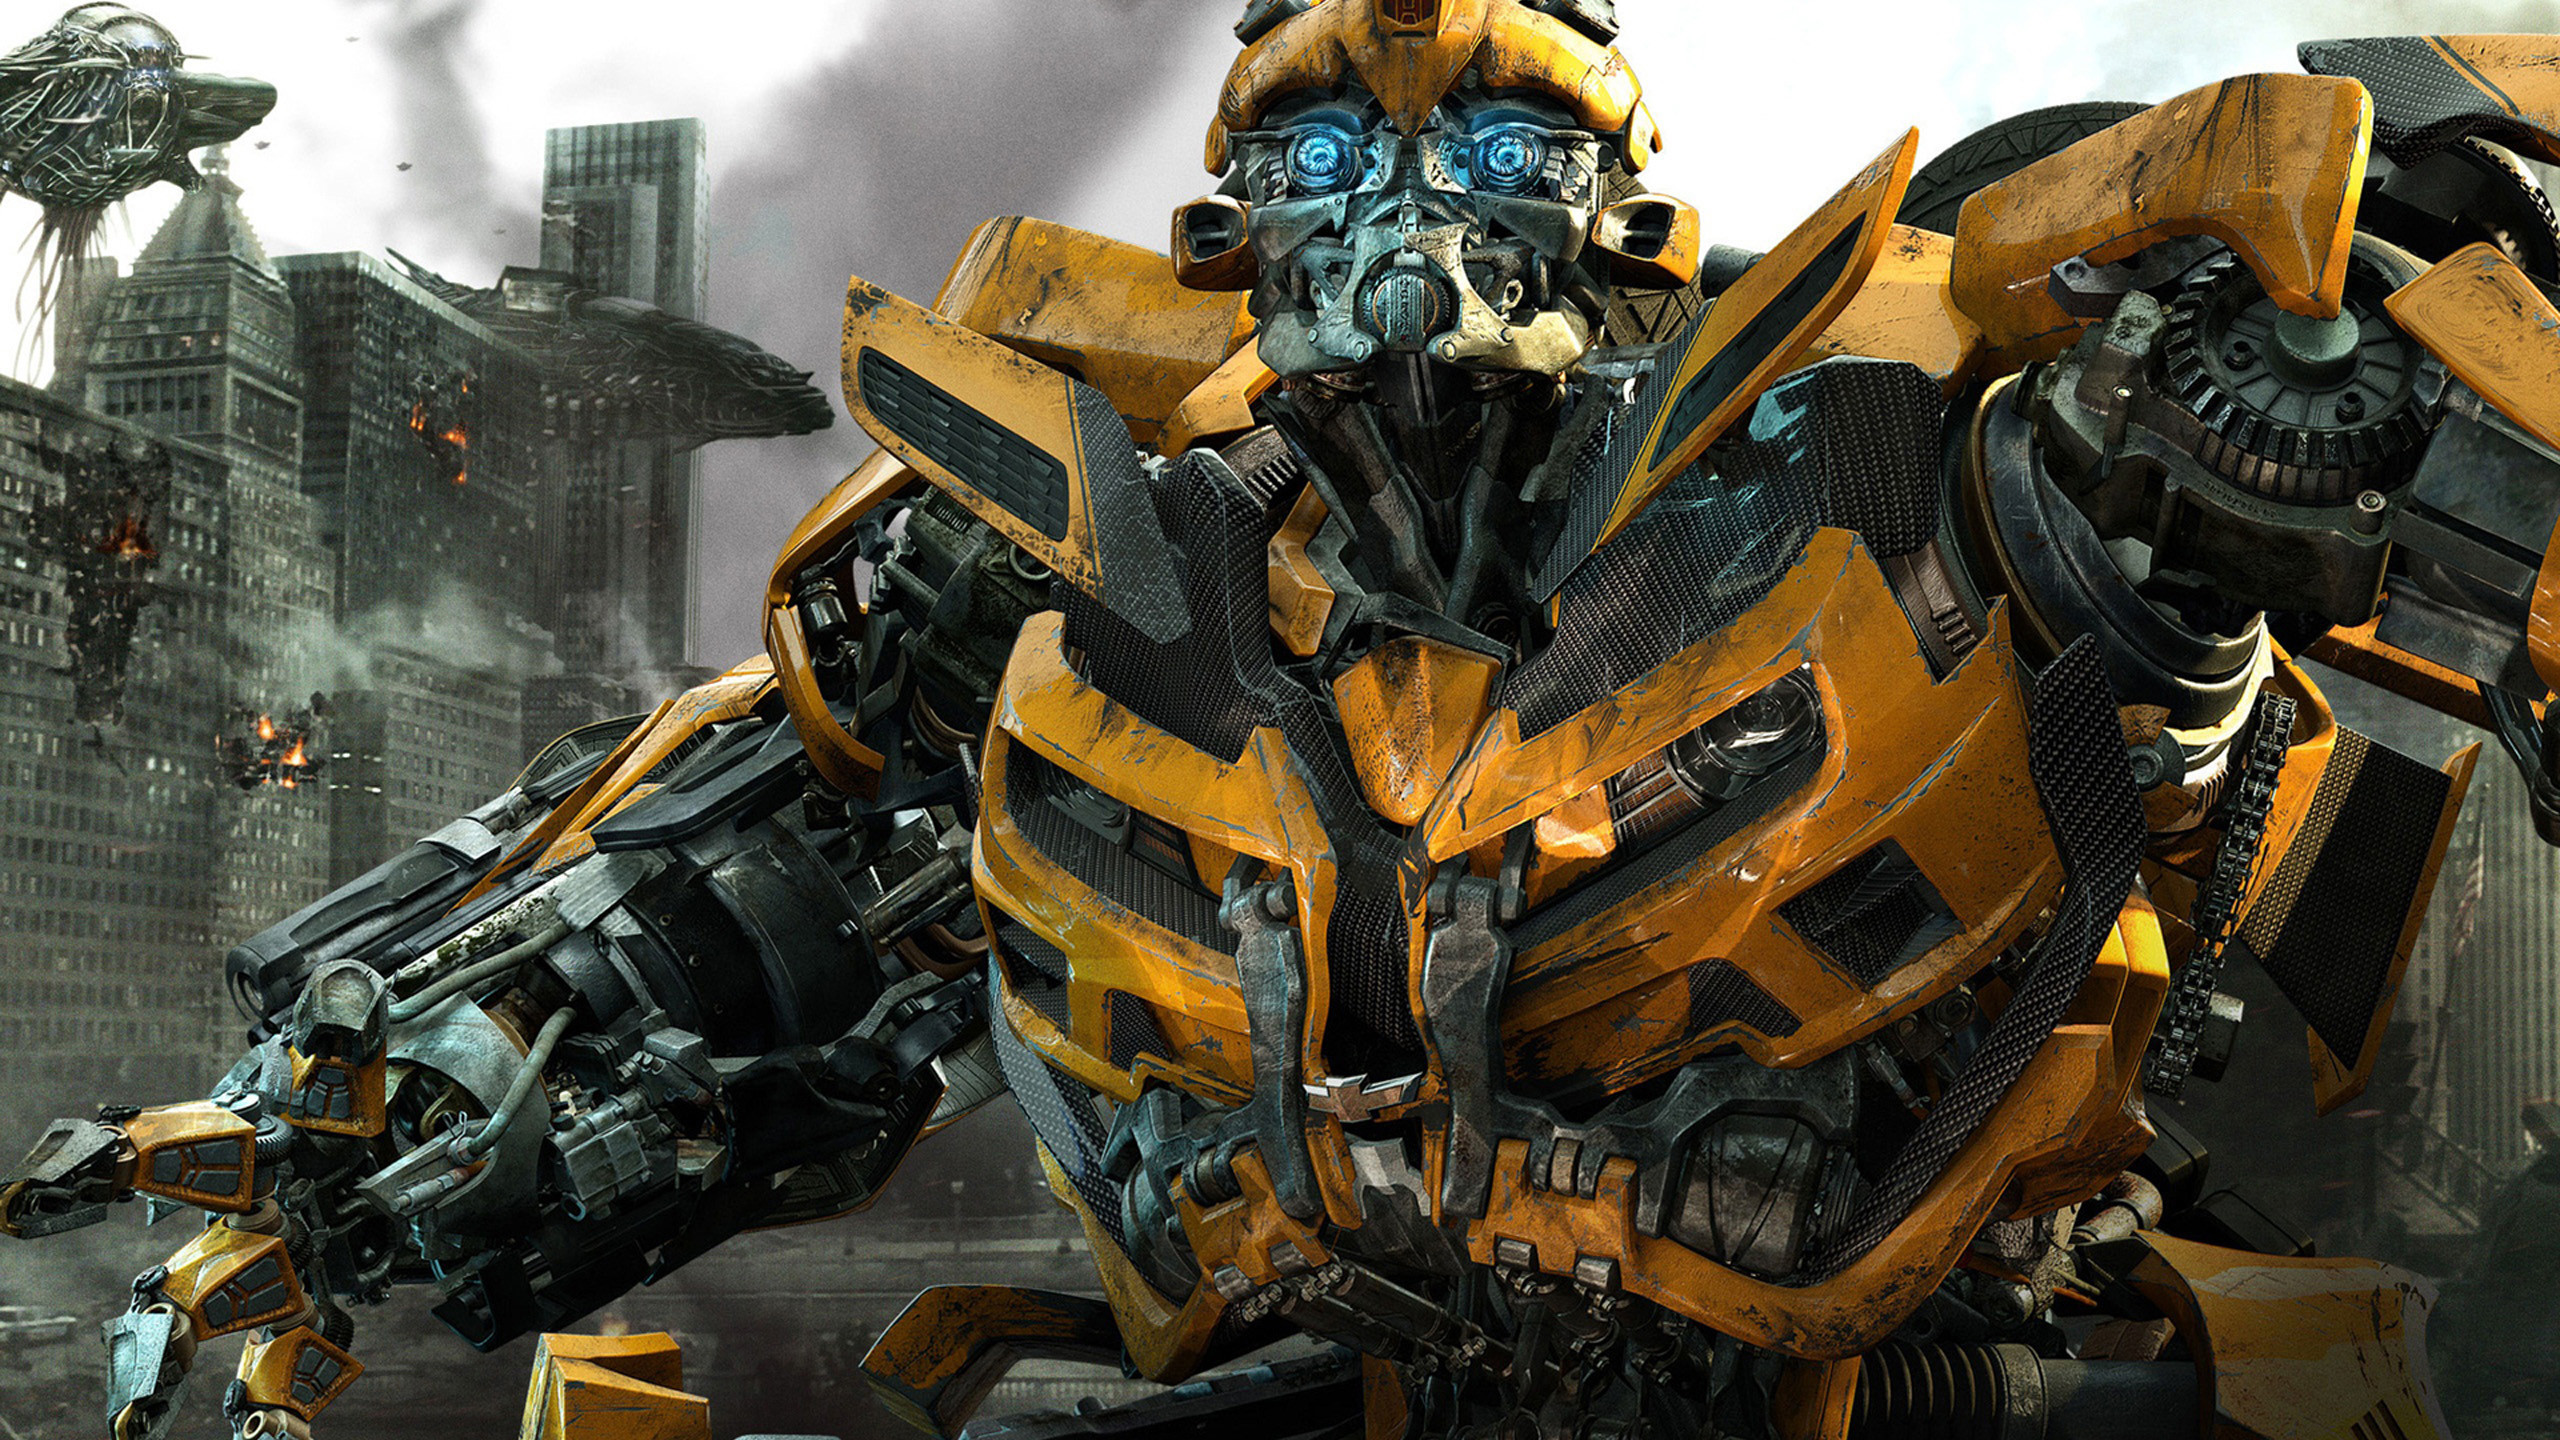 transformers hd wallpapers 1080p download